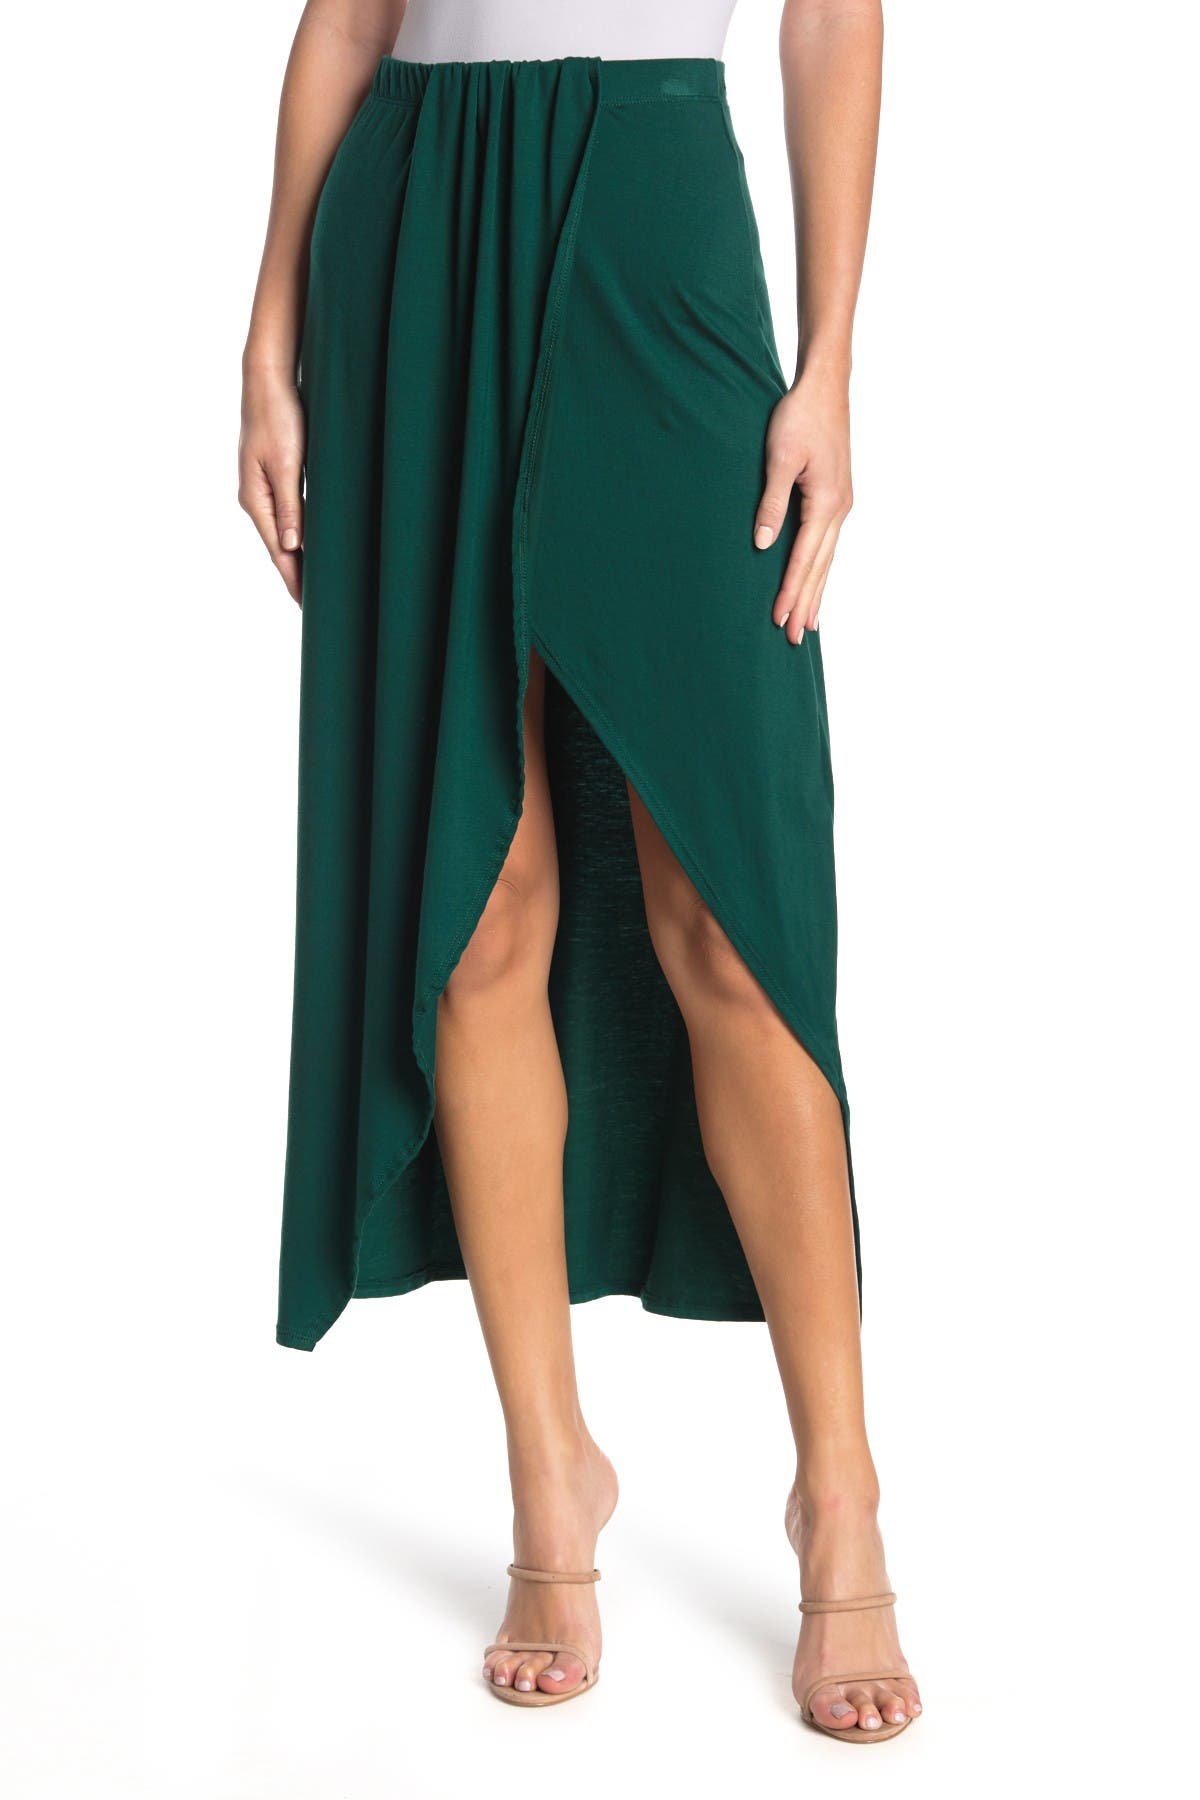 Go Couture Cross Over Slit Maxi Skirt In Sycamore